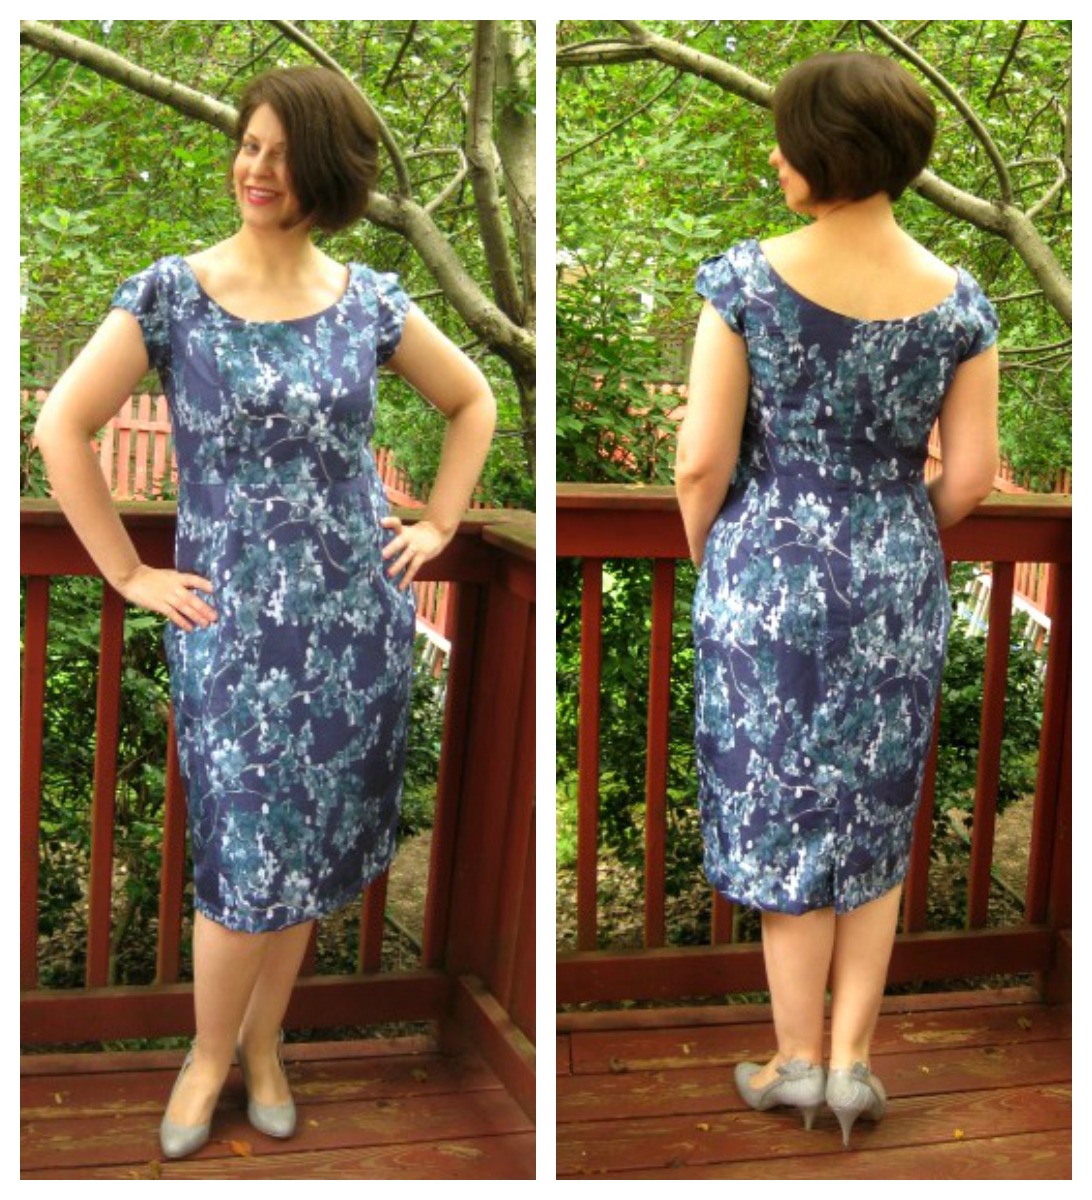 Handmade By Heather B: Summer of Dresses - I Dream in Blue